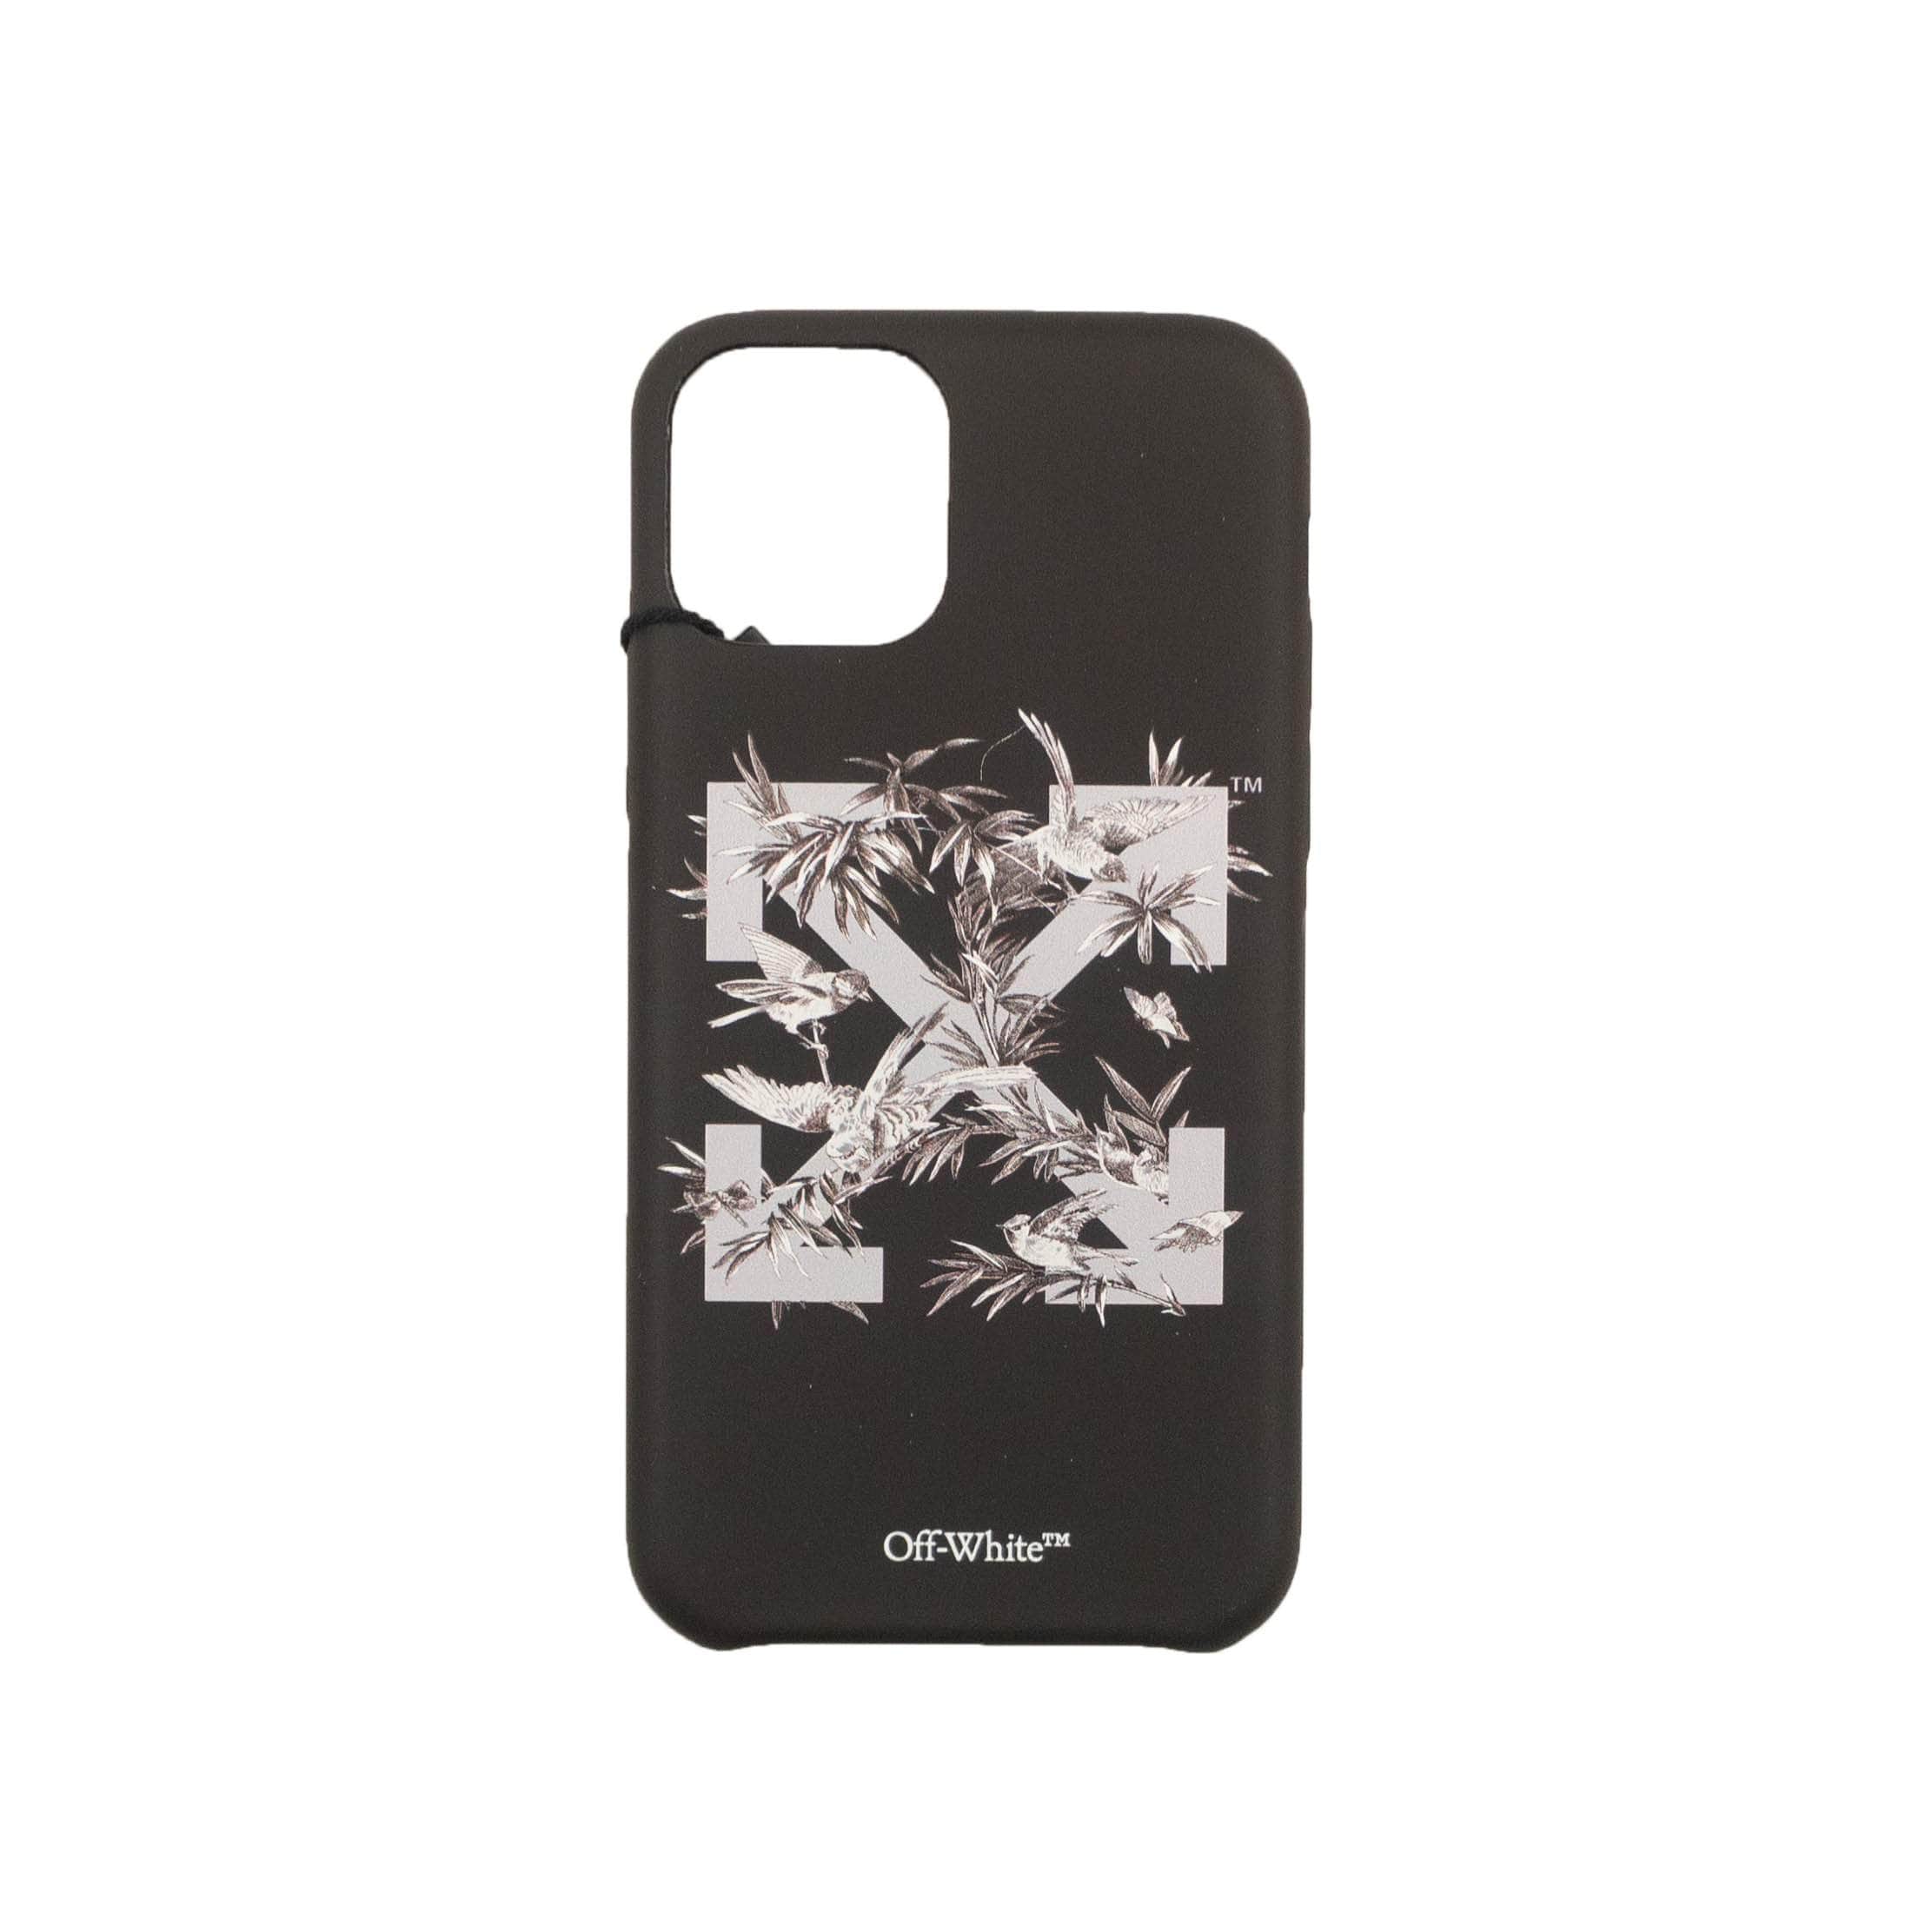 OFF-WHITE c/o VIRGIL ABLOH channelenable-all, chicmi, couponcollection, gender-womens, main-accessories, off-white-c-o-virgil-abloh, OWW, size-os, under-250, womens-phone-cases OS Black Birds 11 Pro Cover 95-OFW-3232/OS 95-OFW-3232/OS